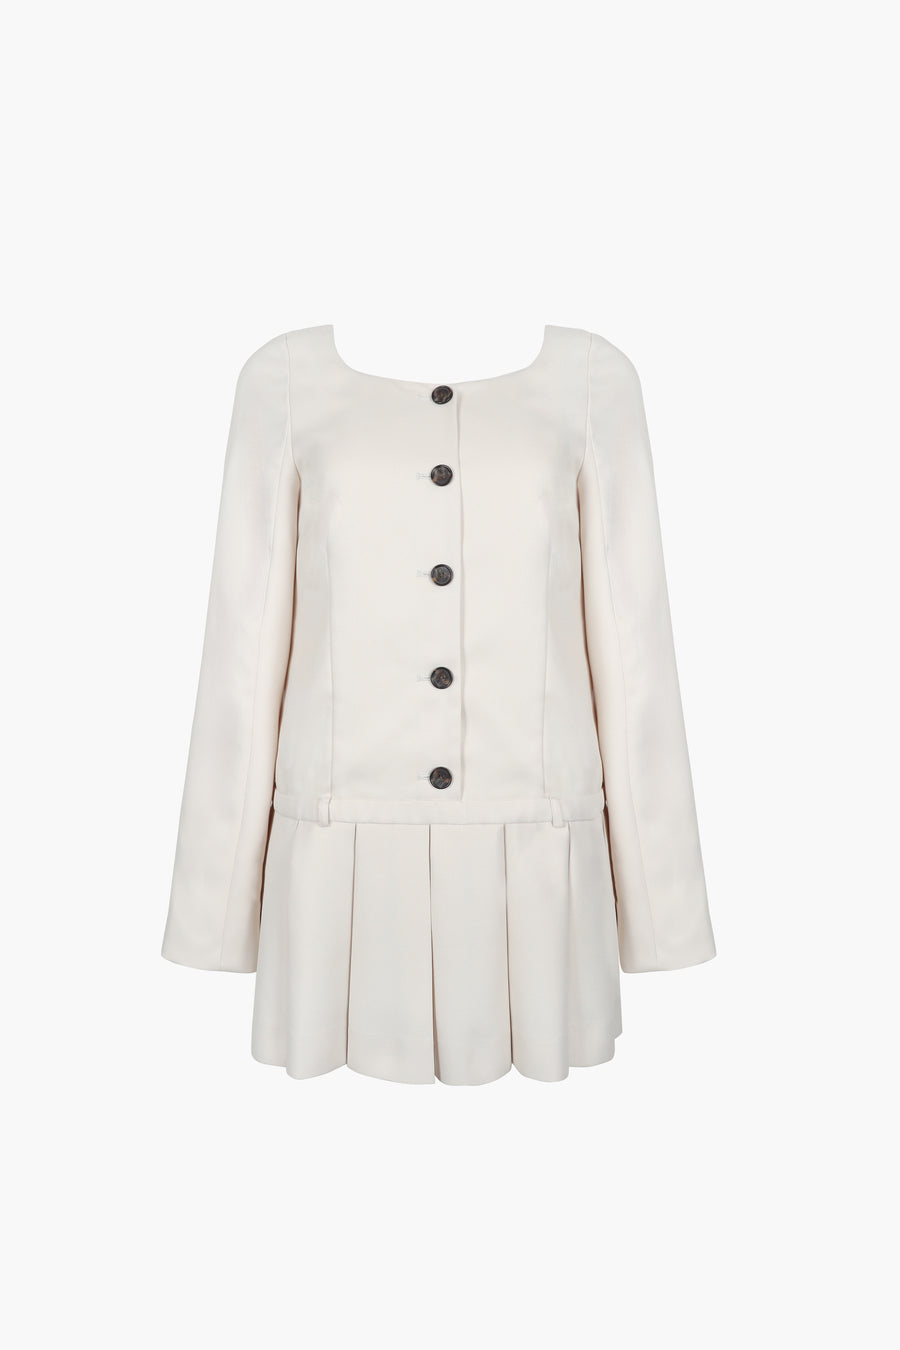 Long sleeve mini dress in off white suting with buttons and pleats